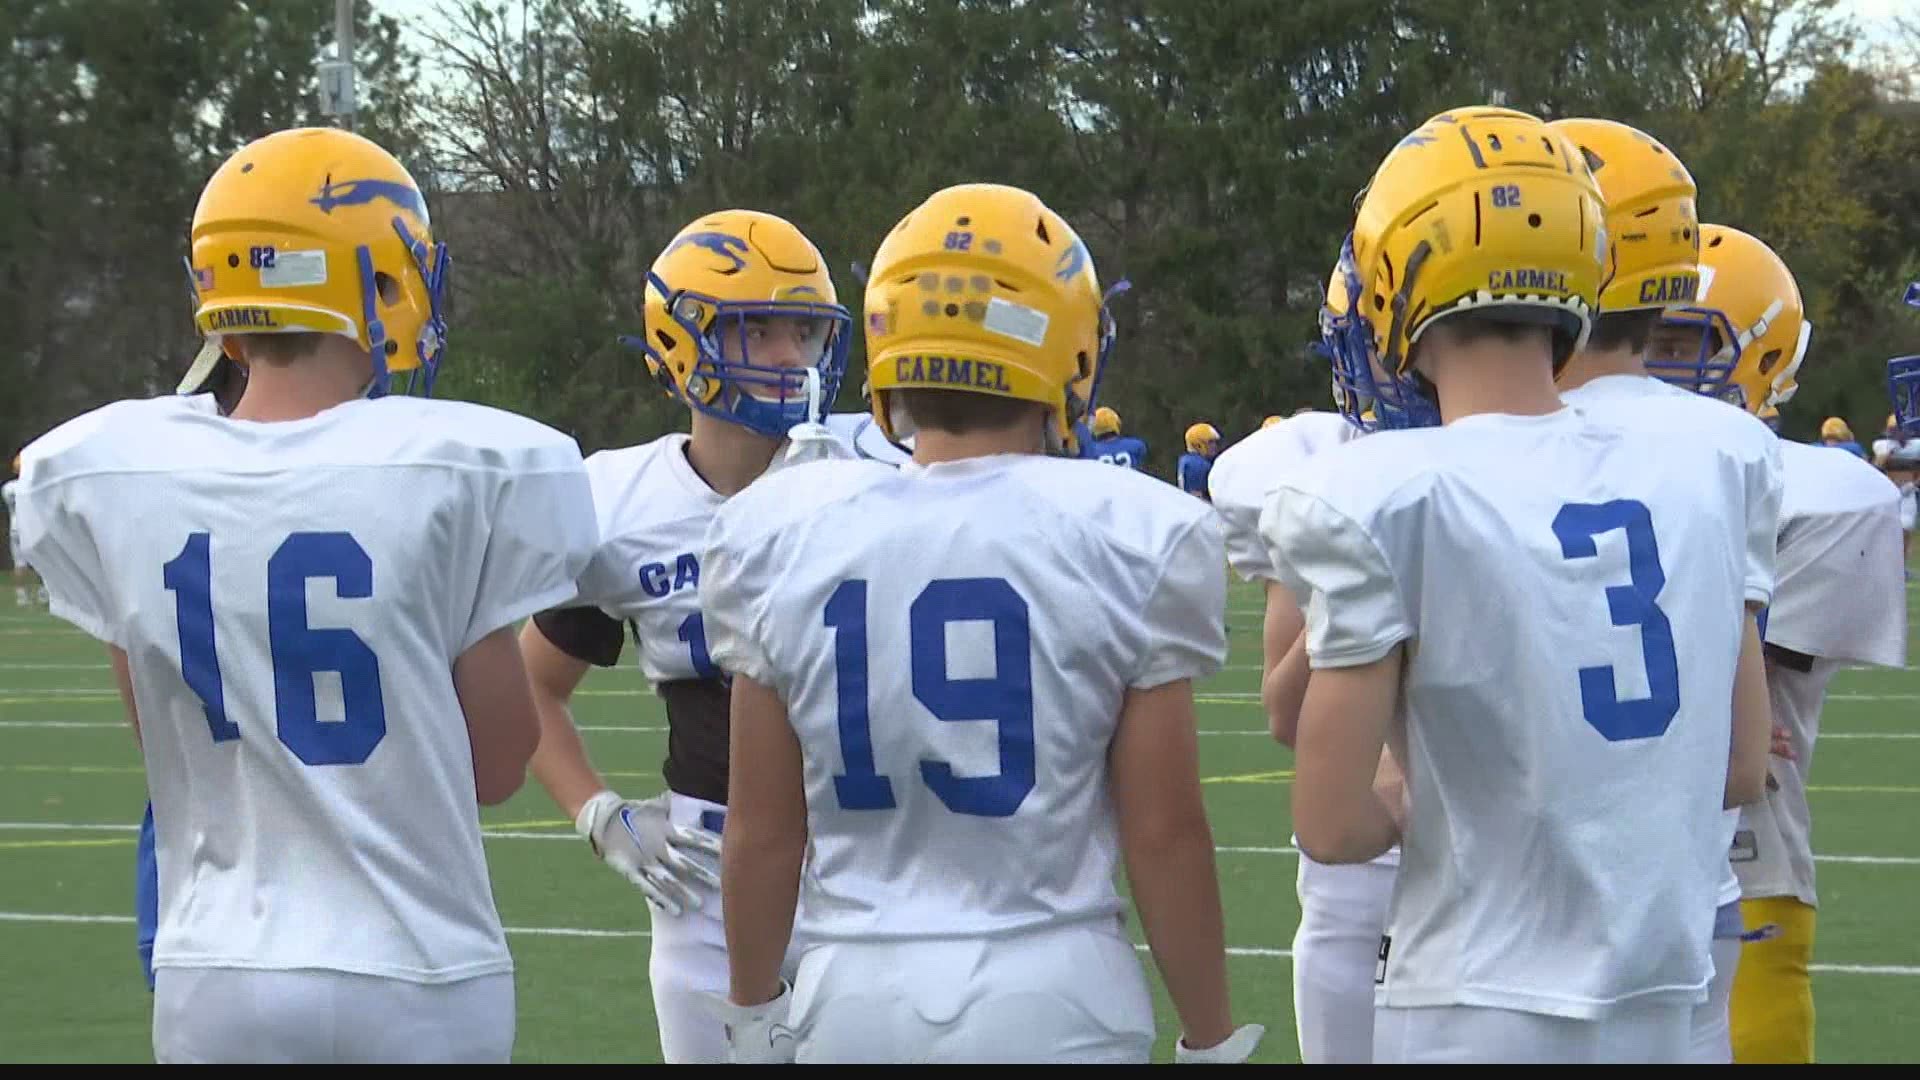 Going into Friday night's games, Carmel is still alive in the playoffs.